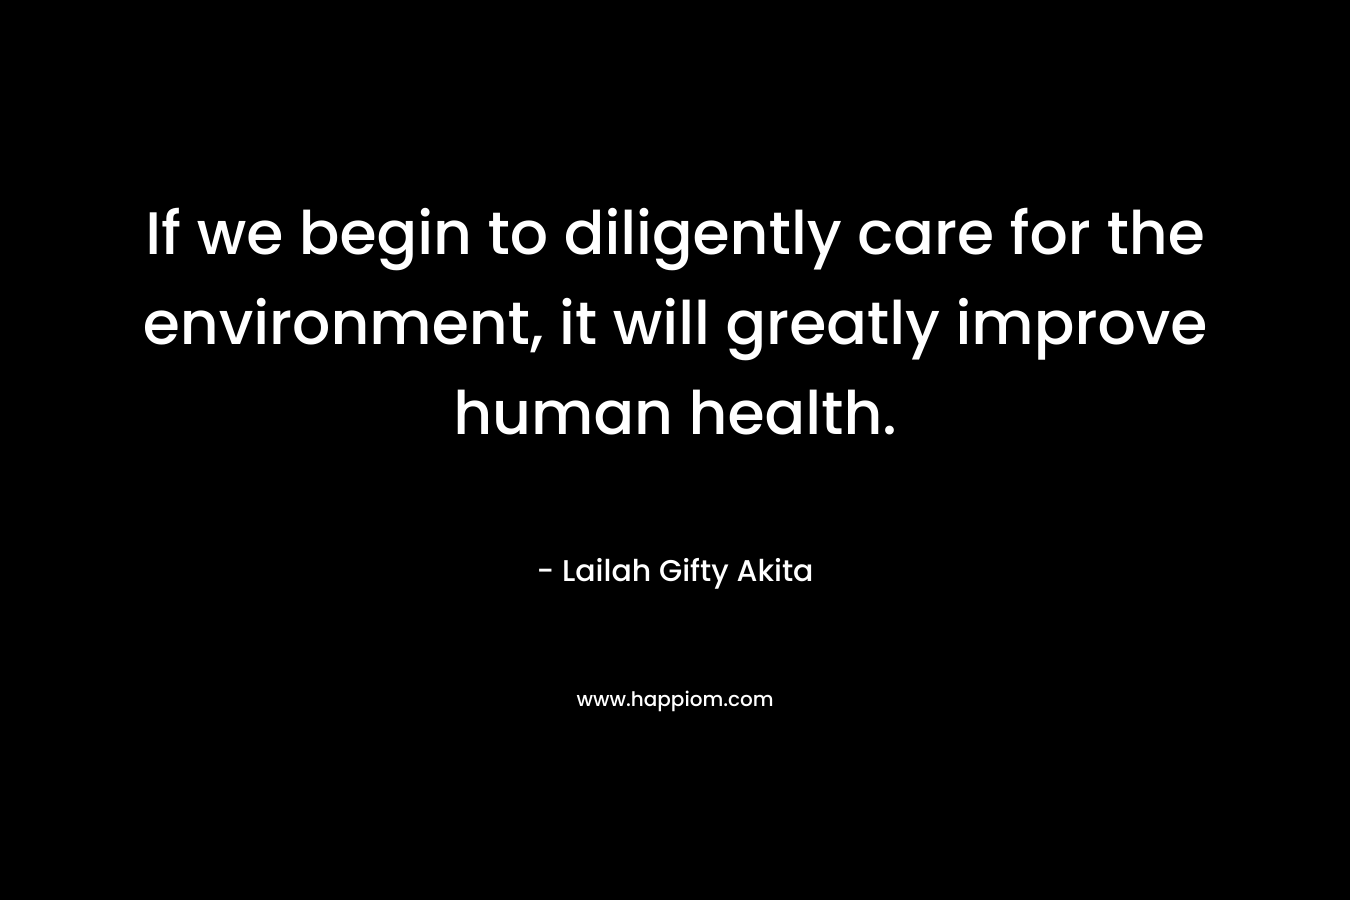 If we begin to diligently care for the environment, it will greatly improve human health.